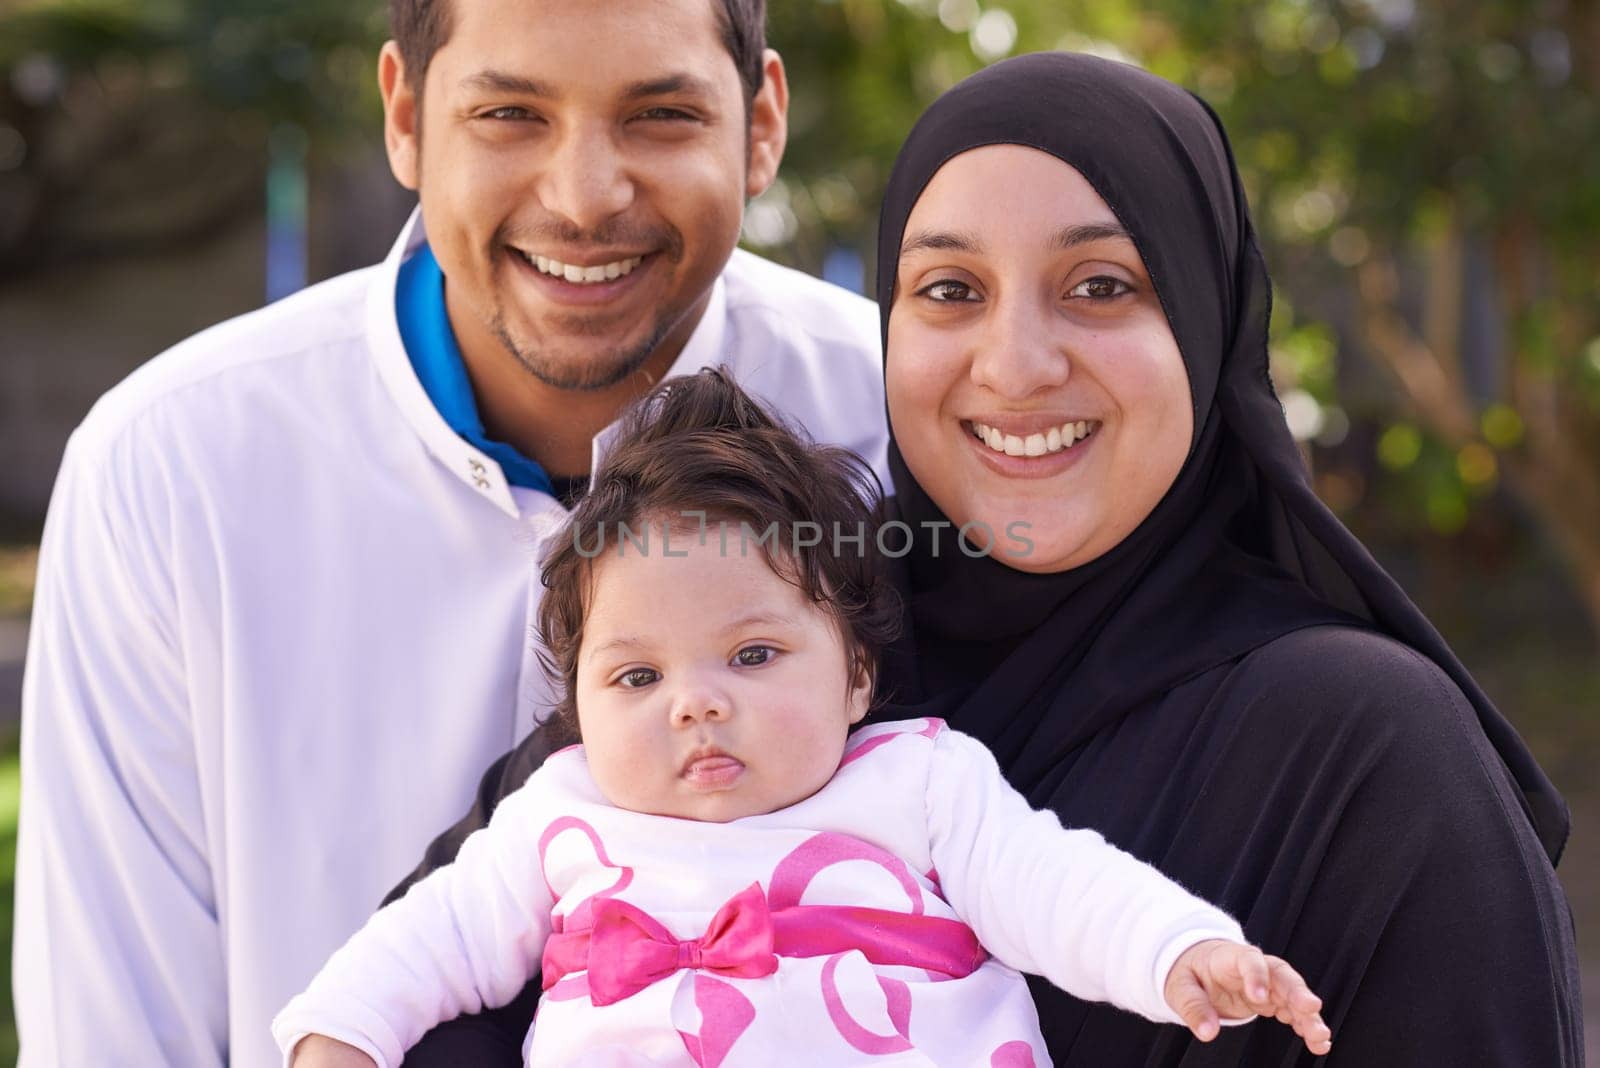 Muslim family, garden and portrait of parents with baby for bonding, relationship and outdoors together. Islam, happy and mother, father and newborn infant for love, childcare or support in park.